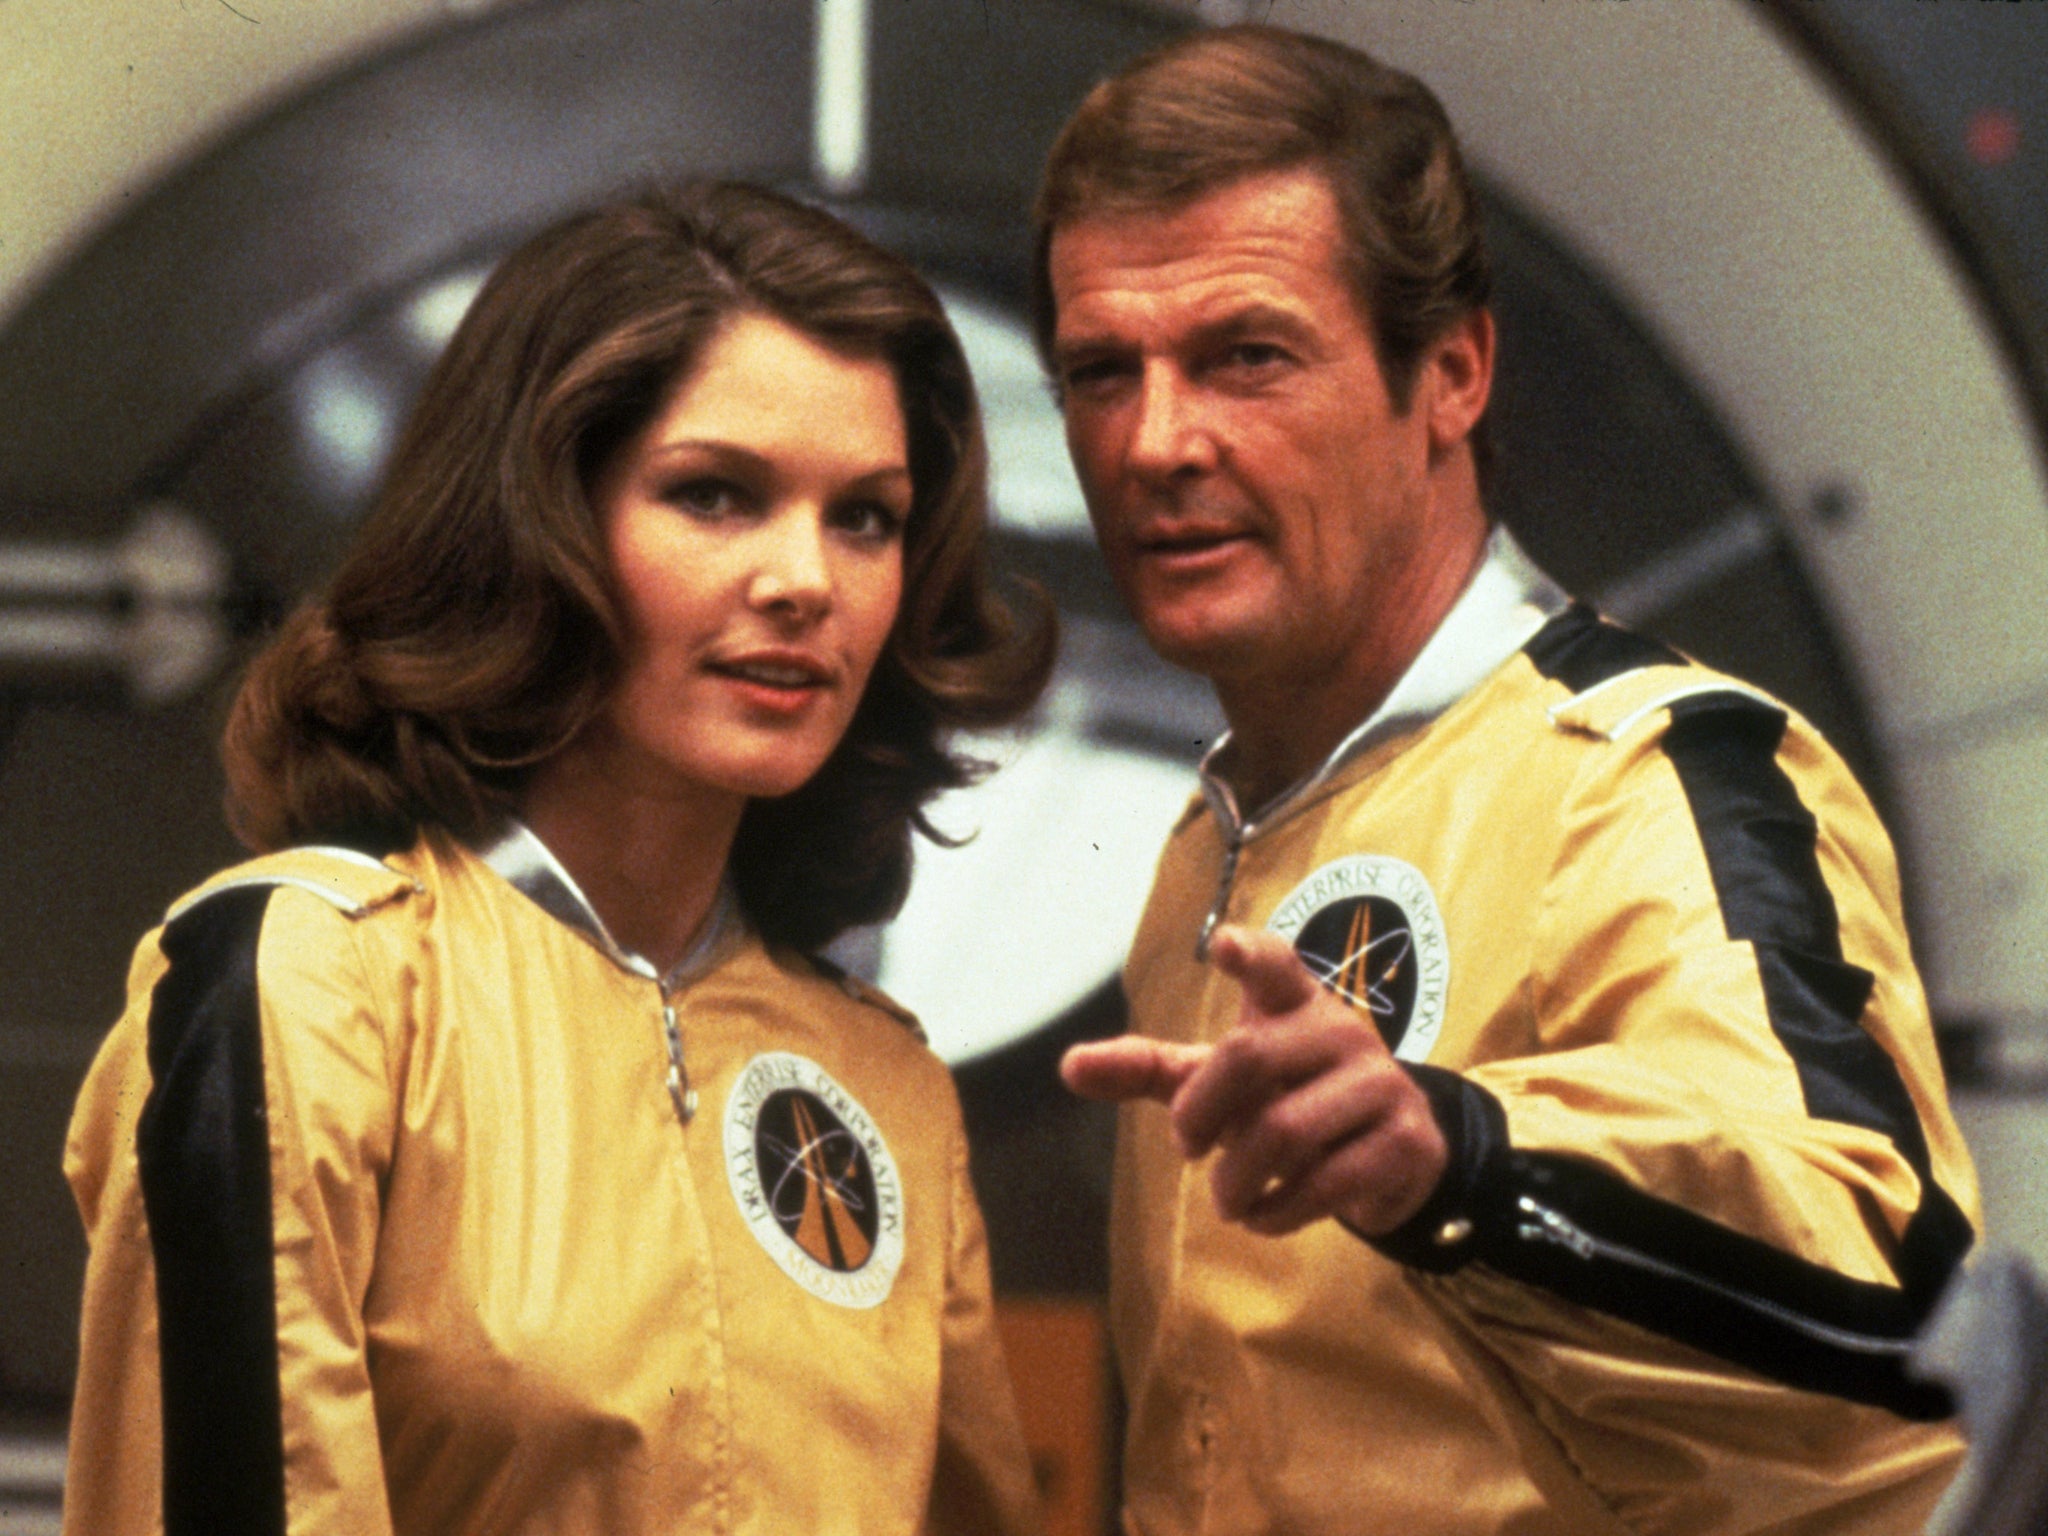 It may have been good enough for James Bond and Dr Holly Goodhead in Moonraker, but sex in space could have potential health risks